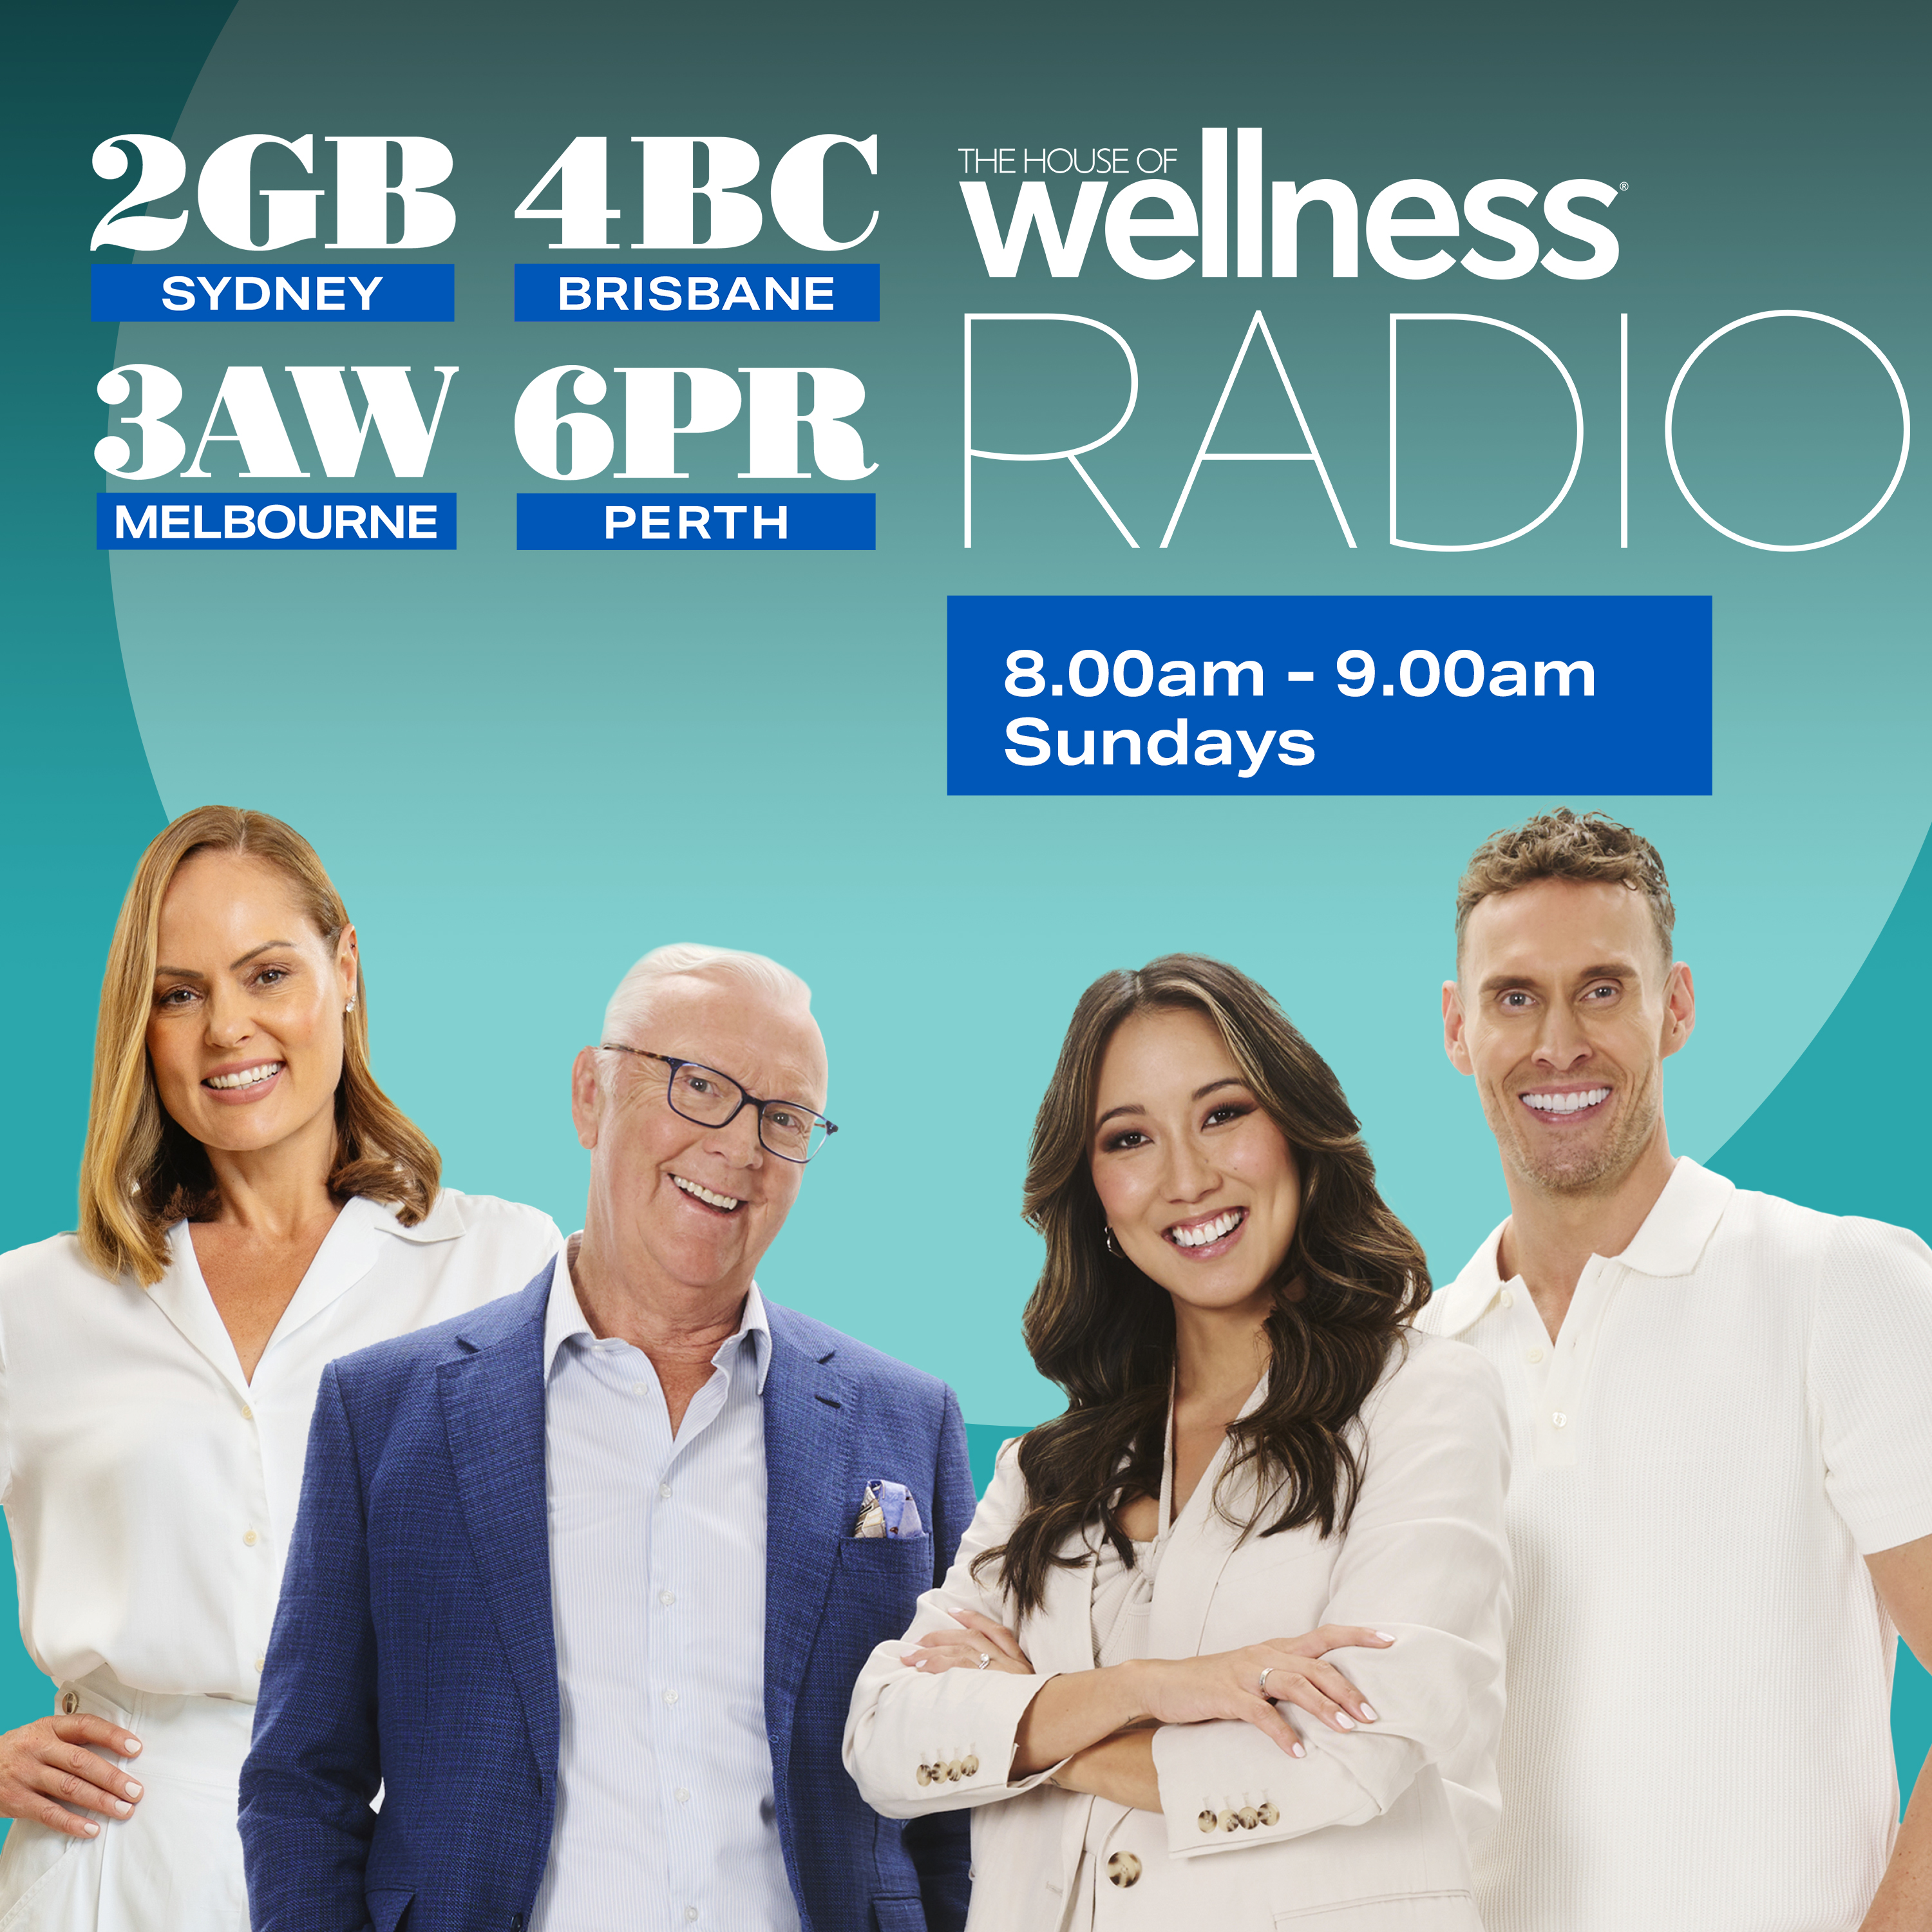 Dr Mikaela Chinotti from the Australian Dental Association joins the House of Wellness